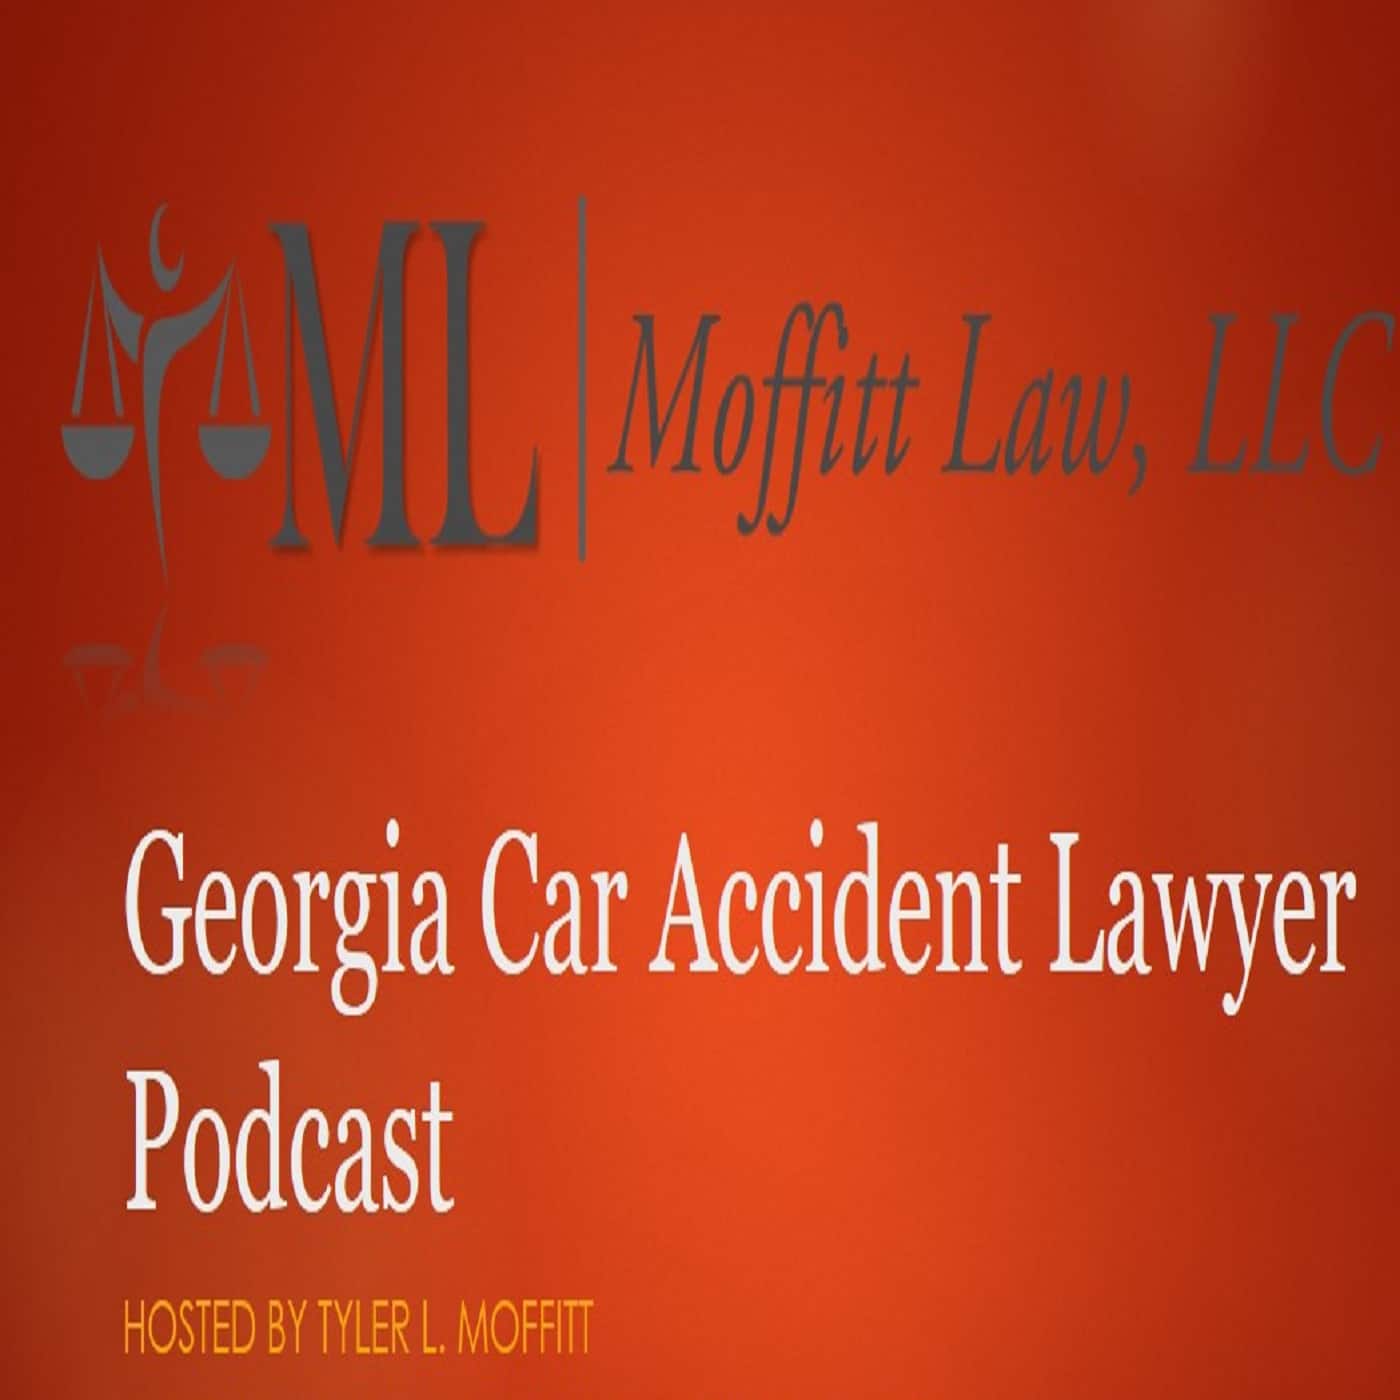 Georgia Car Accident Lawyer Podcast 001 Why Use a Lawyer?